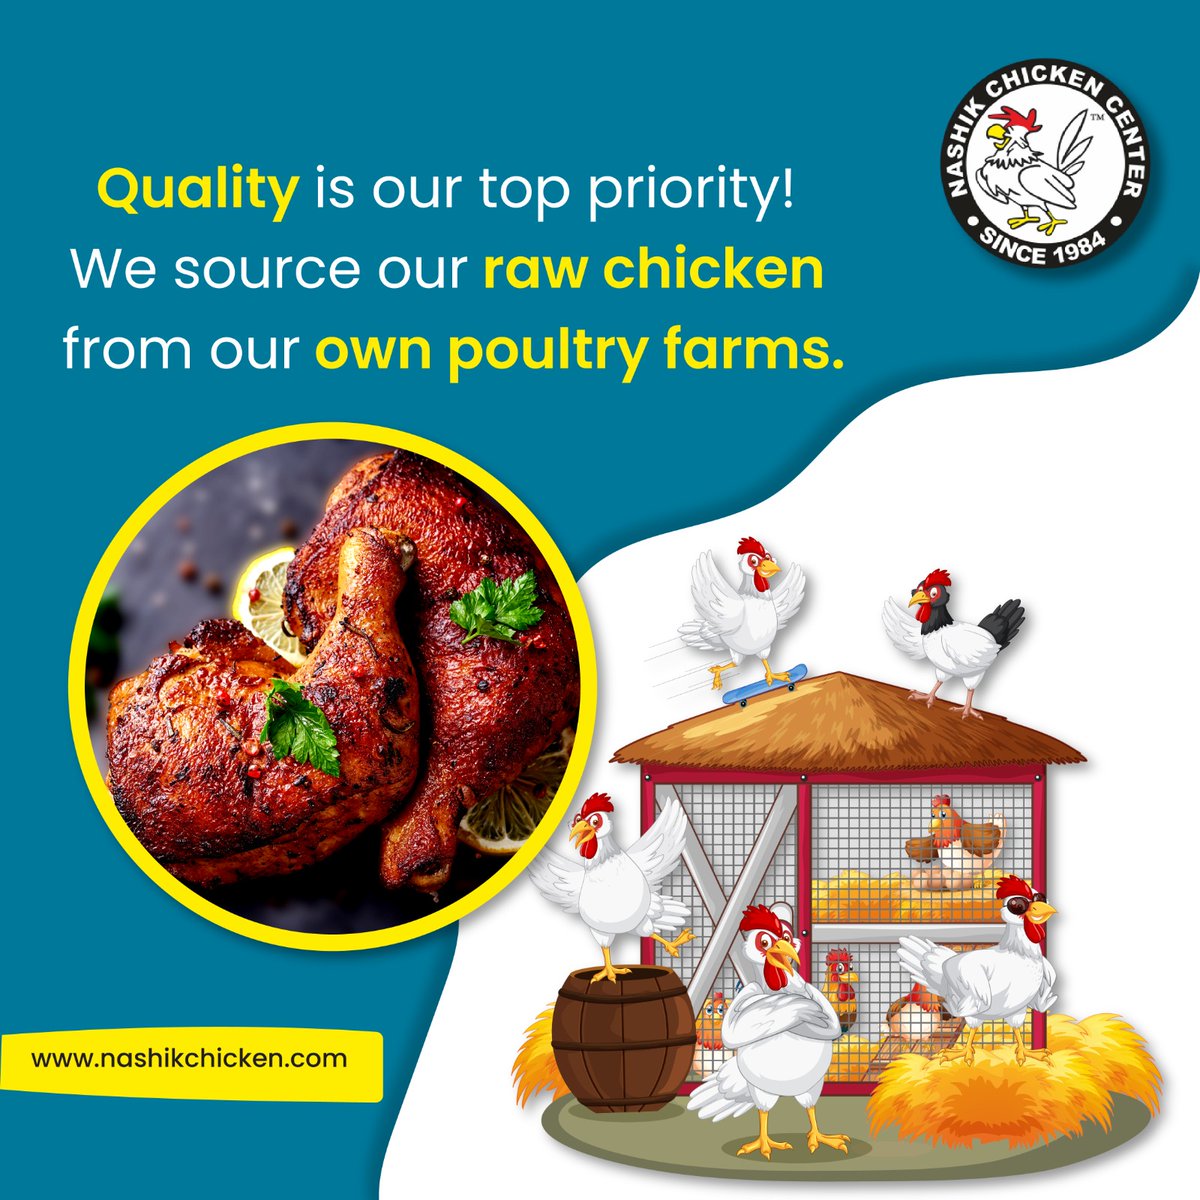 When it comes to your food, trust only the best. At Nashik Chicken Center, we ensure that our raw chicken is of the highest quality.   #NashikChickenCenter #QualityChicken #TrustedSuppliers #FreshnessGuaranteed #HealthyEating #NashikChicken